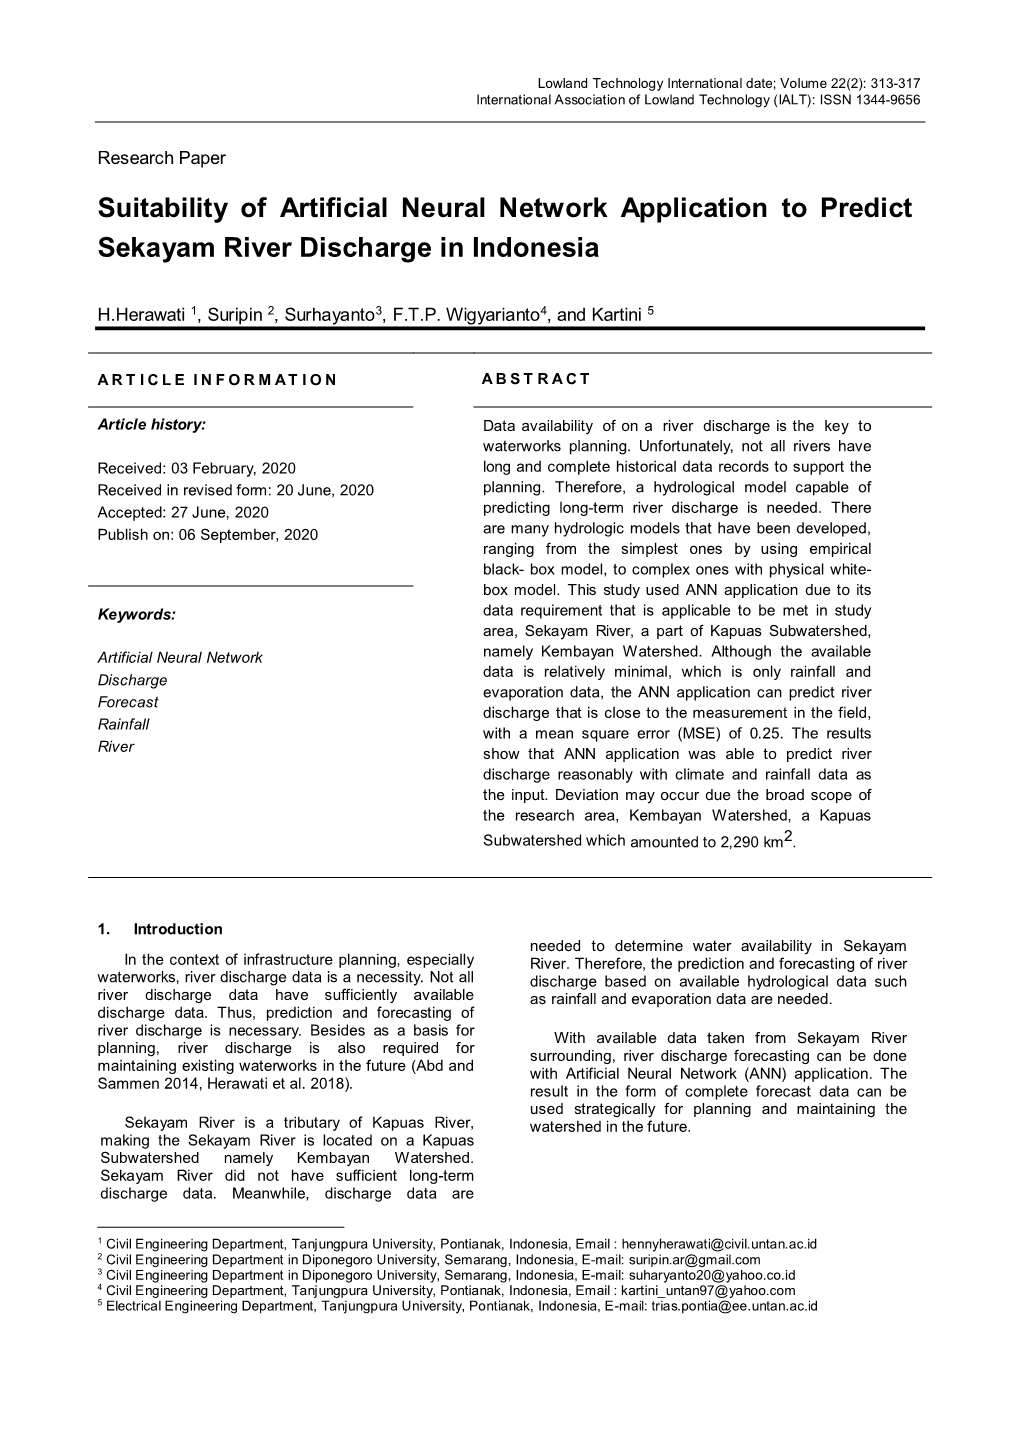 Suitability of Artificial Neural Network Application to Predict Sekayam River Discharge in Indonesia